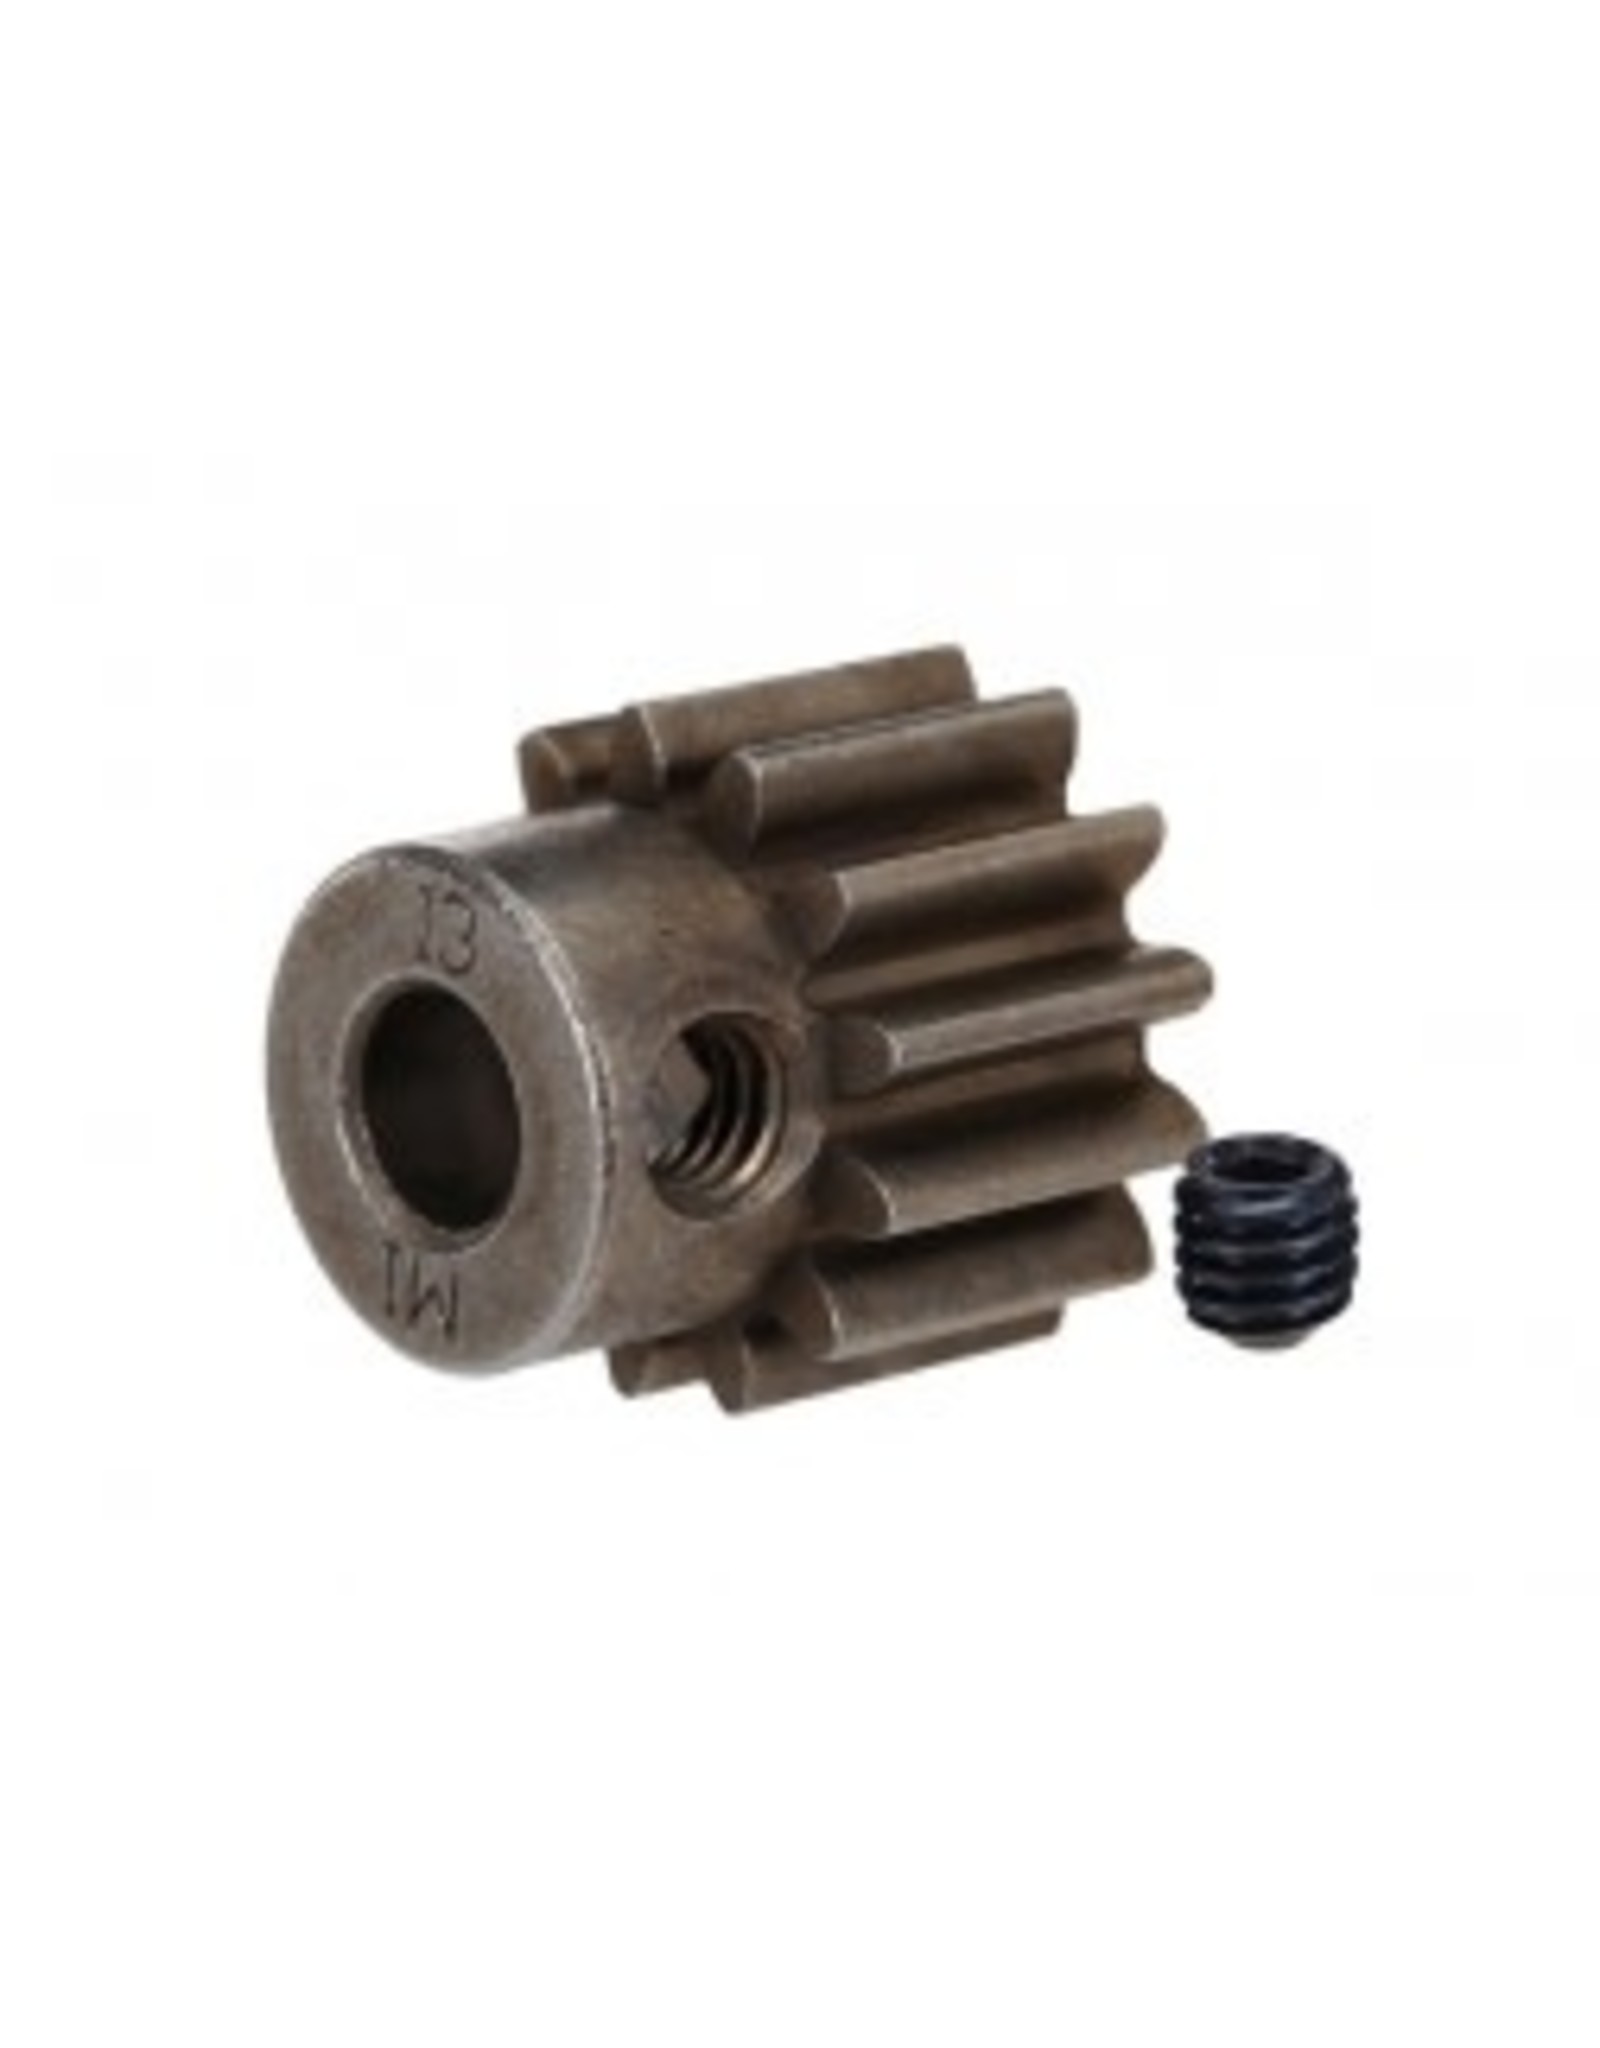 Traxxas Gear, 13-T pinion (1.0 metric pitch) (fits 5mm shaft)/ set screw (for use only with steel spur gears)